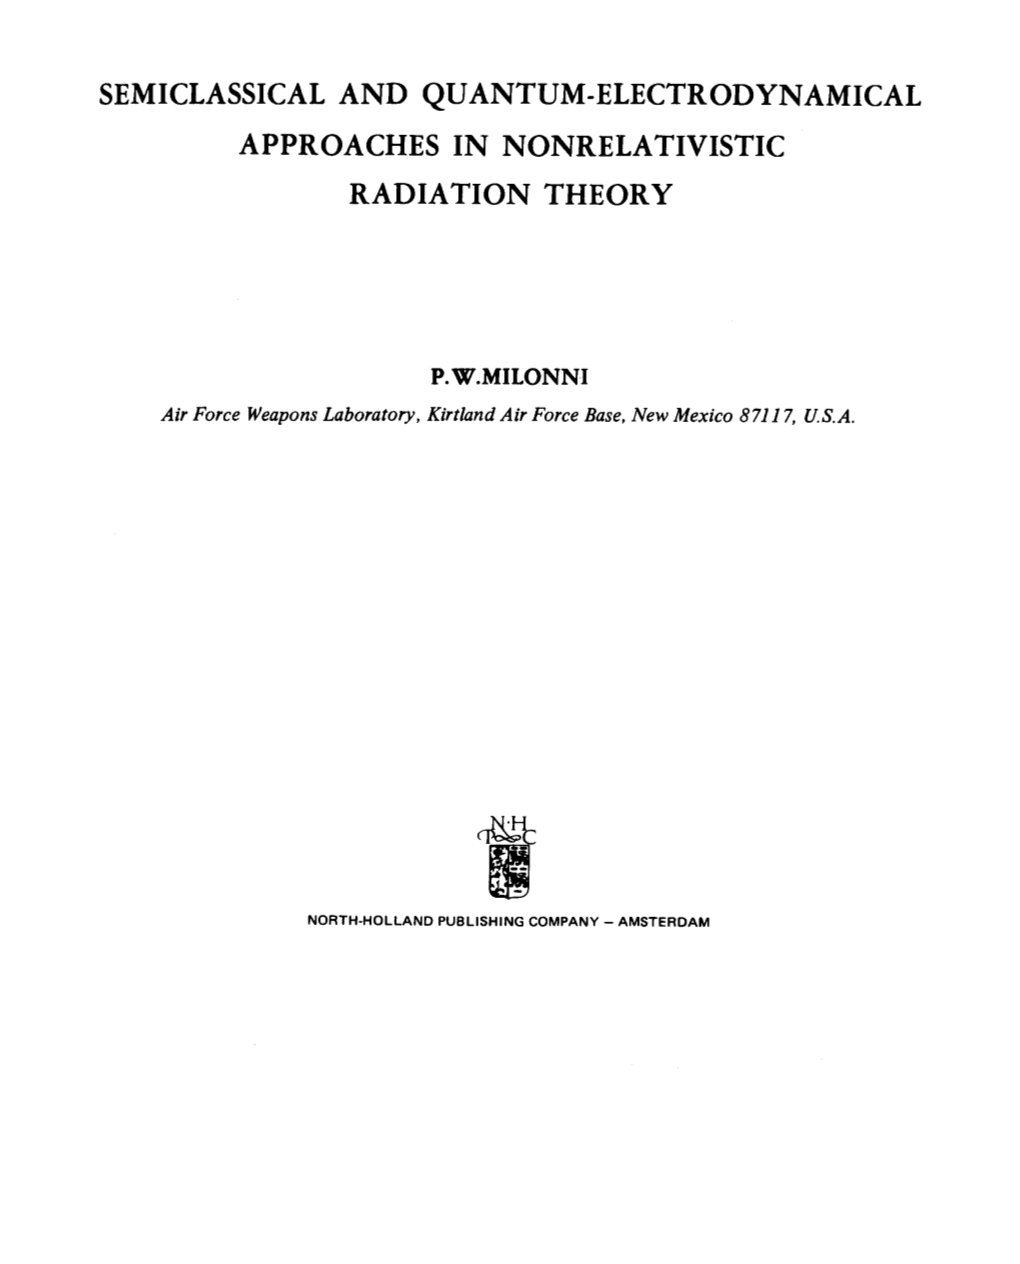 Semiclassical and Quantum-Electrodynamical Approaches in Nonrelativistic Radiation Theory